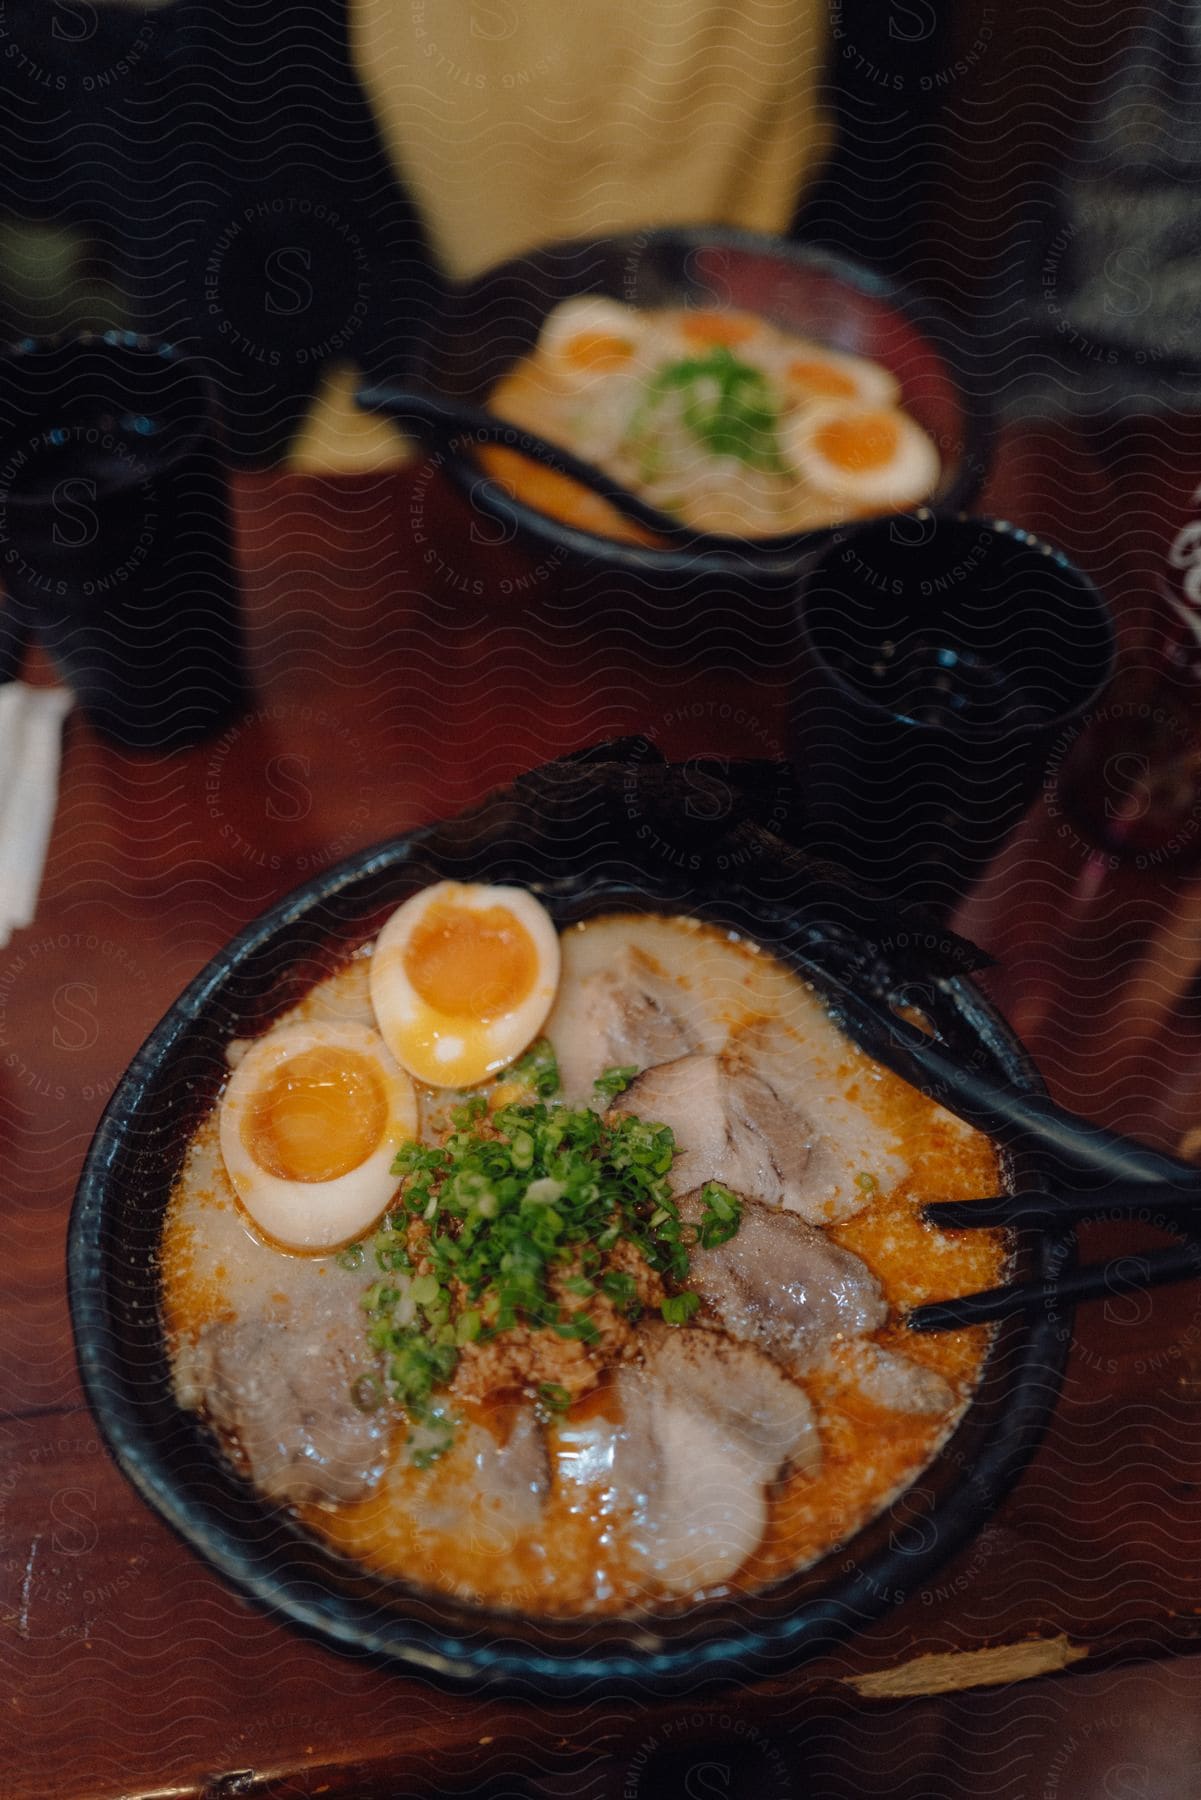 A steaming bowl of ramen with slices of pork, a halved hard-boiled egg, and chopped green onions sits on a wooden table.